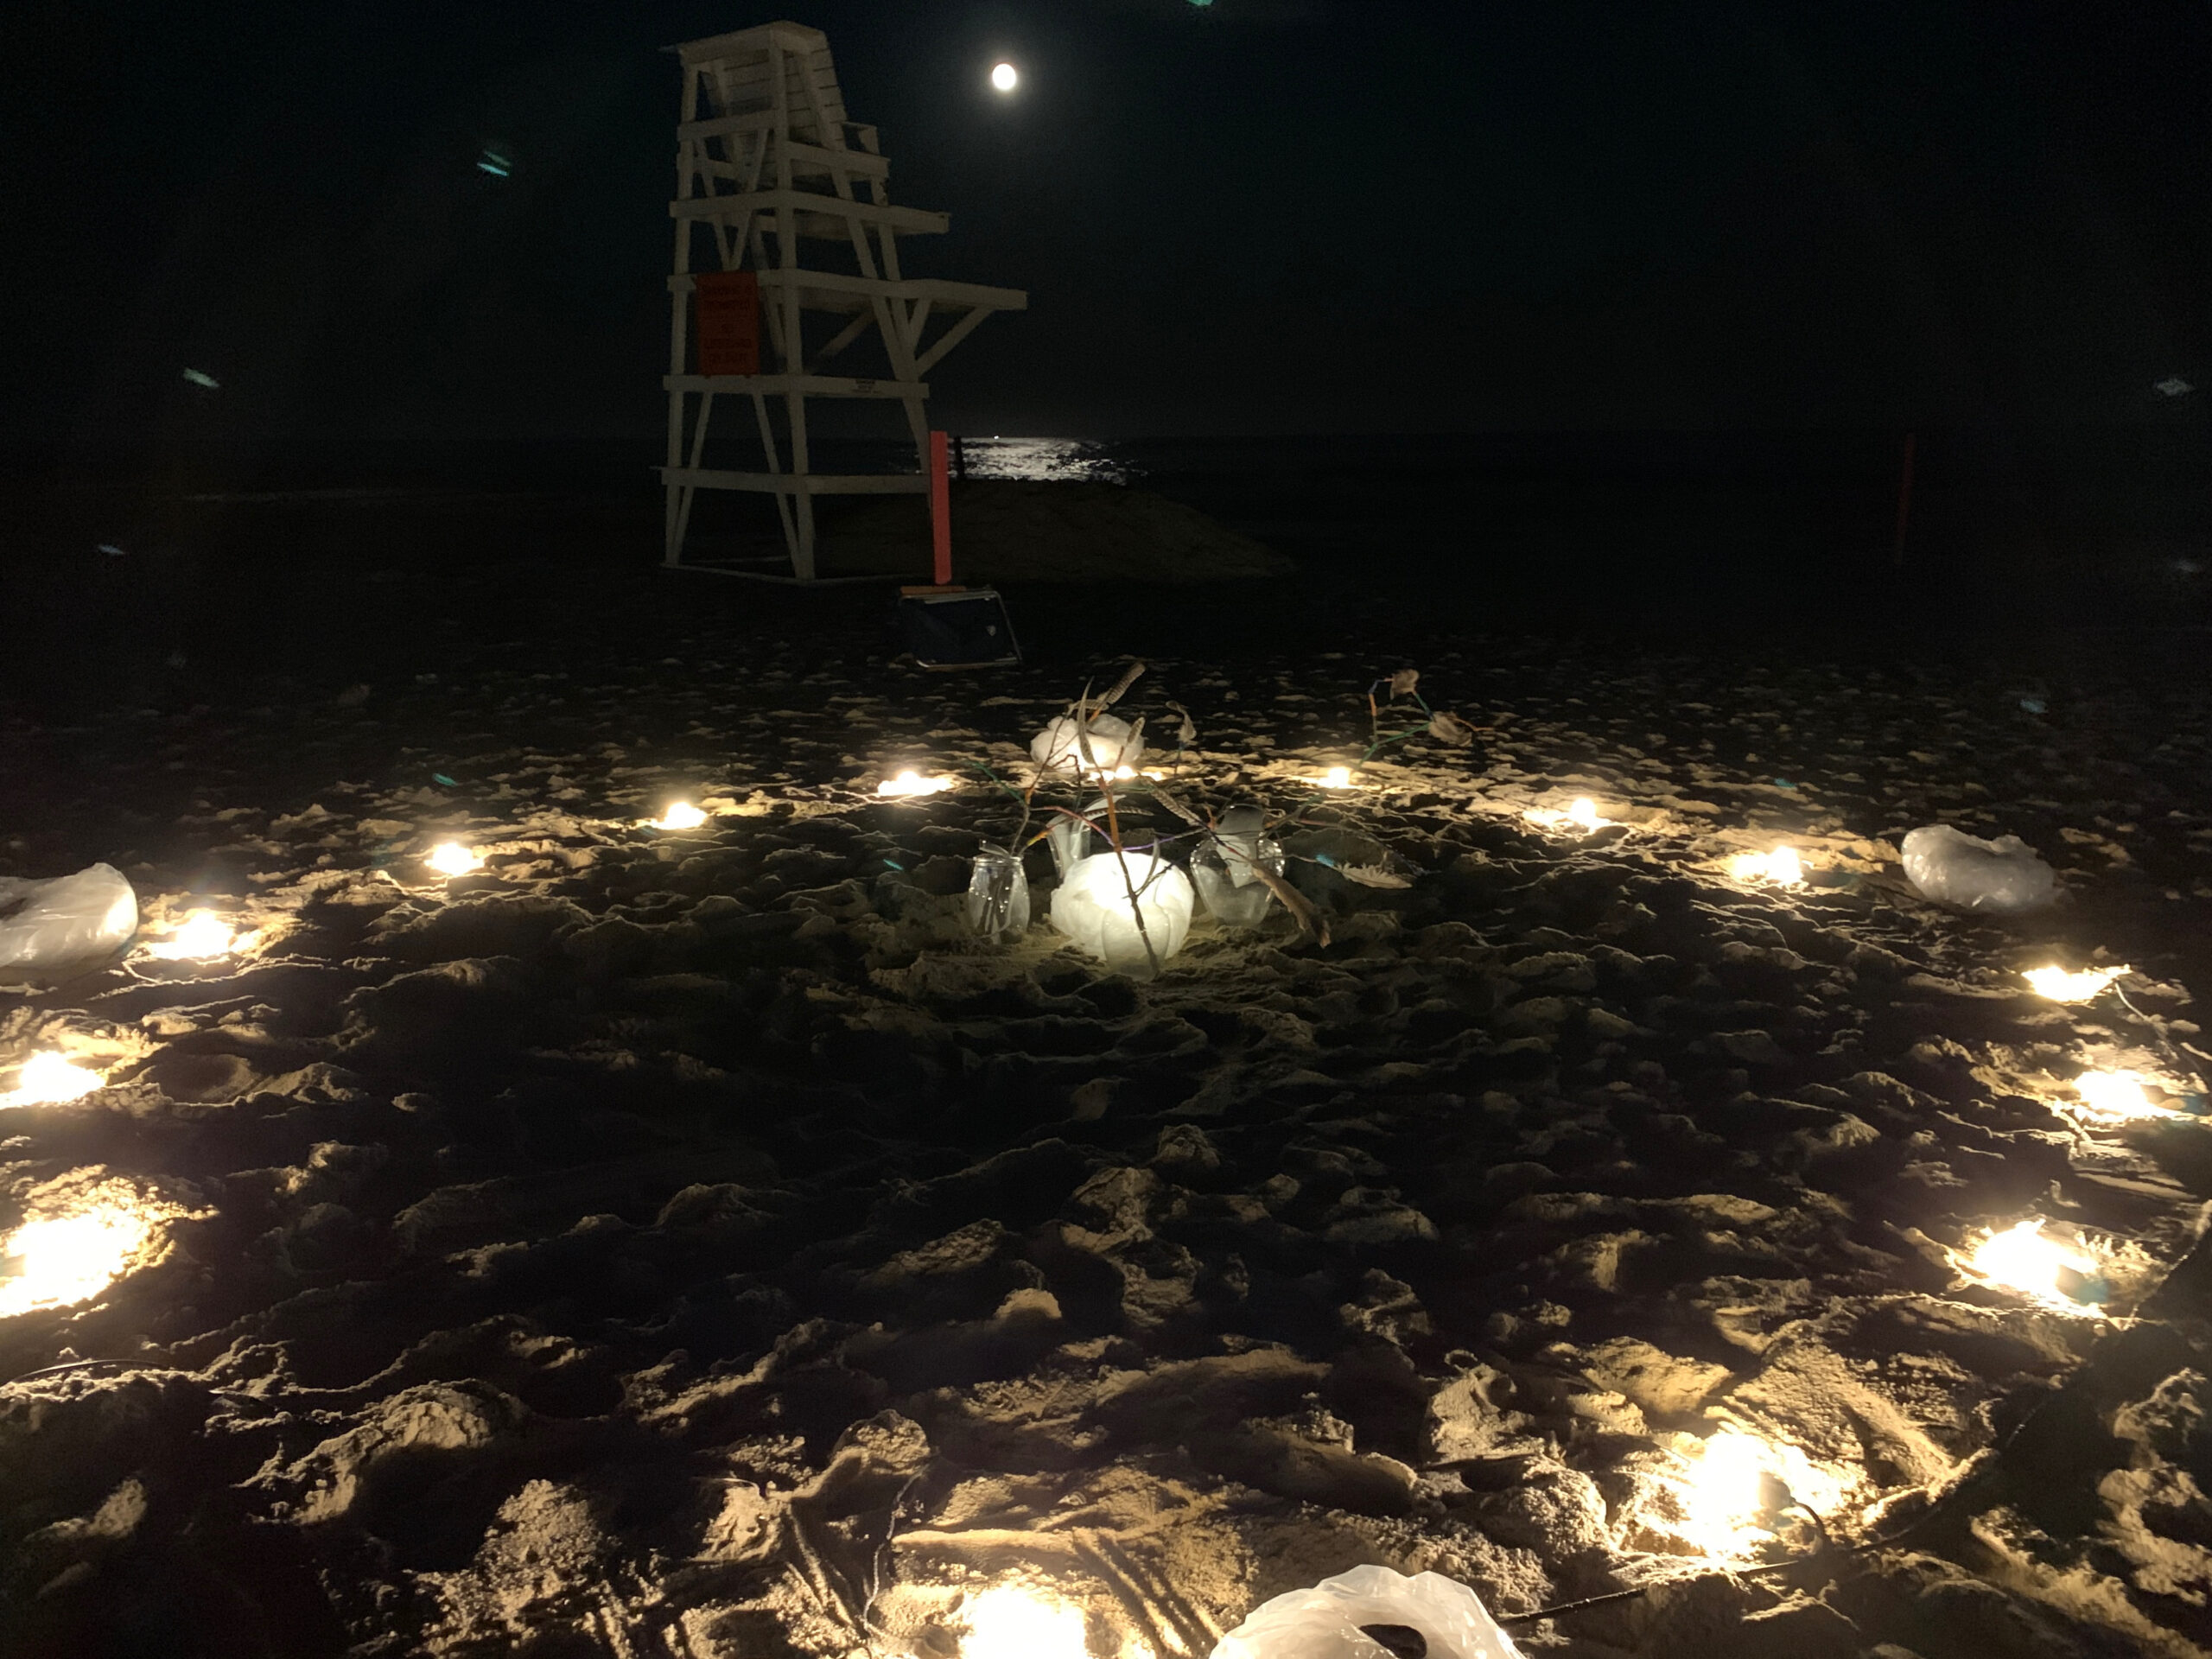 Artist Elana Bajo's art installation under the full moon at East Hampton's Main Beach on September 10 was created in response to a musical love letter from West Coast artist Jasmine Orpilla. ANNETTE HINKLE